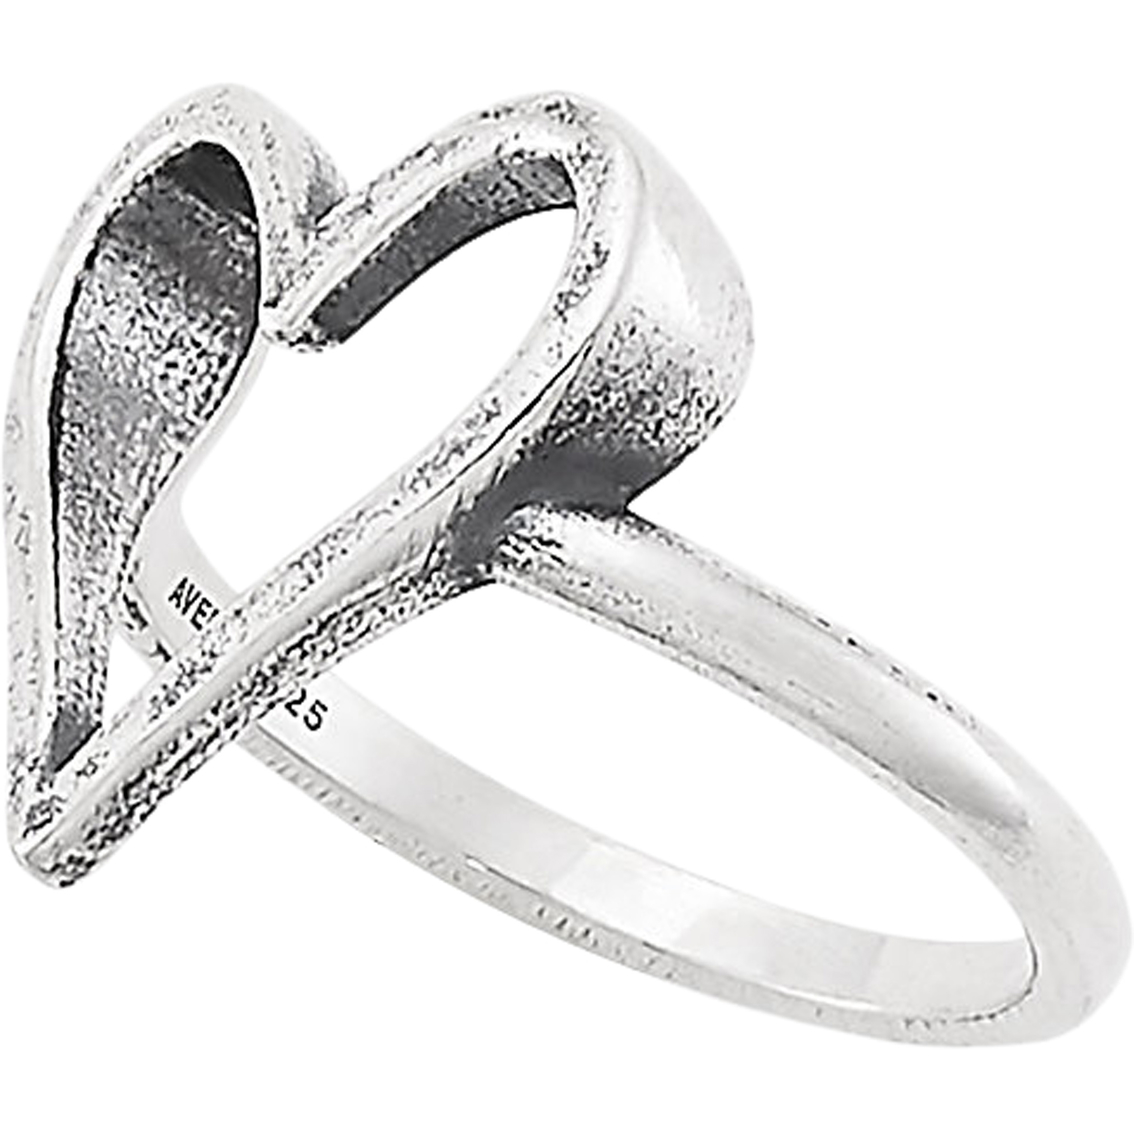 James Avery Fearless Heart Ring - Image 2 of 2